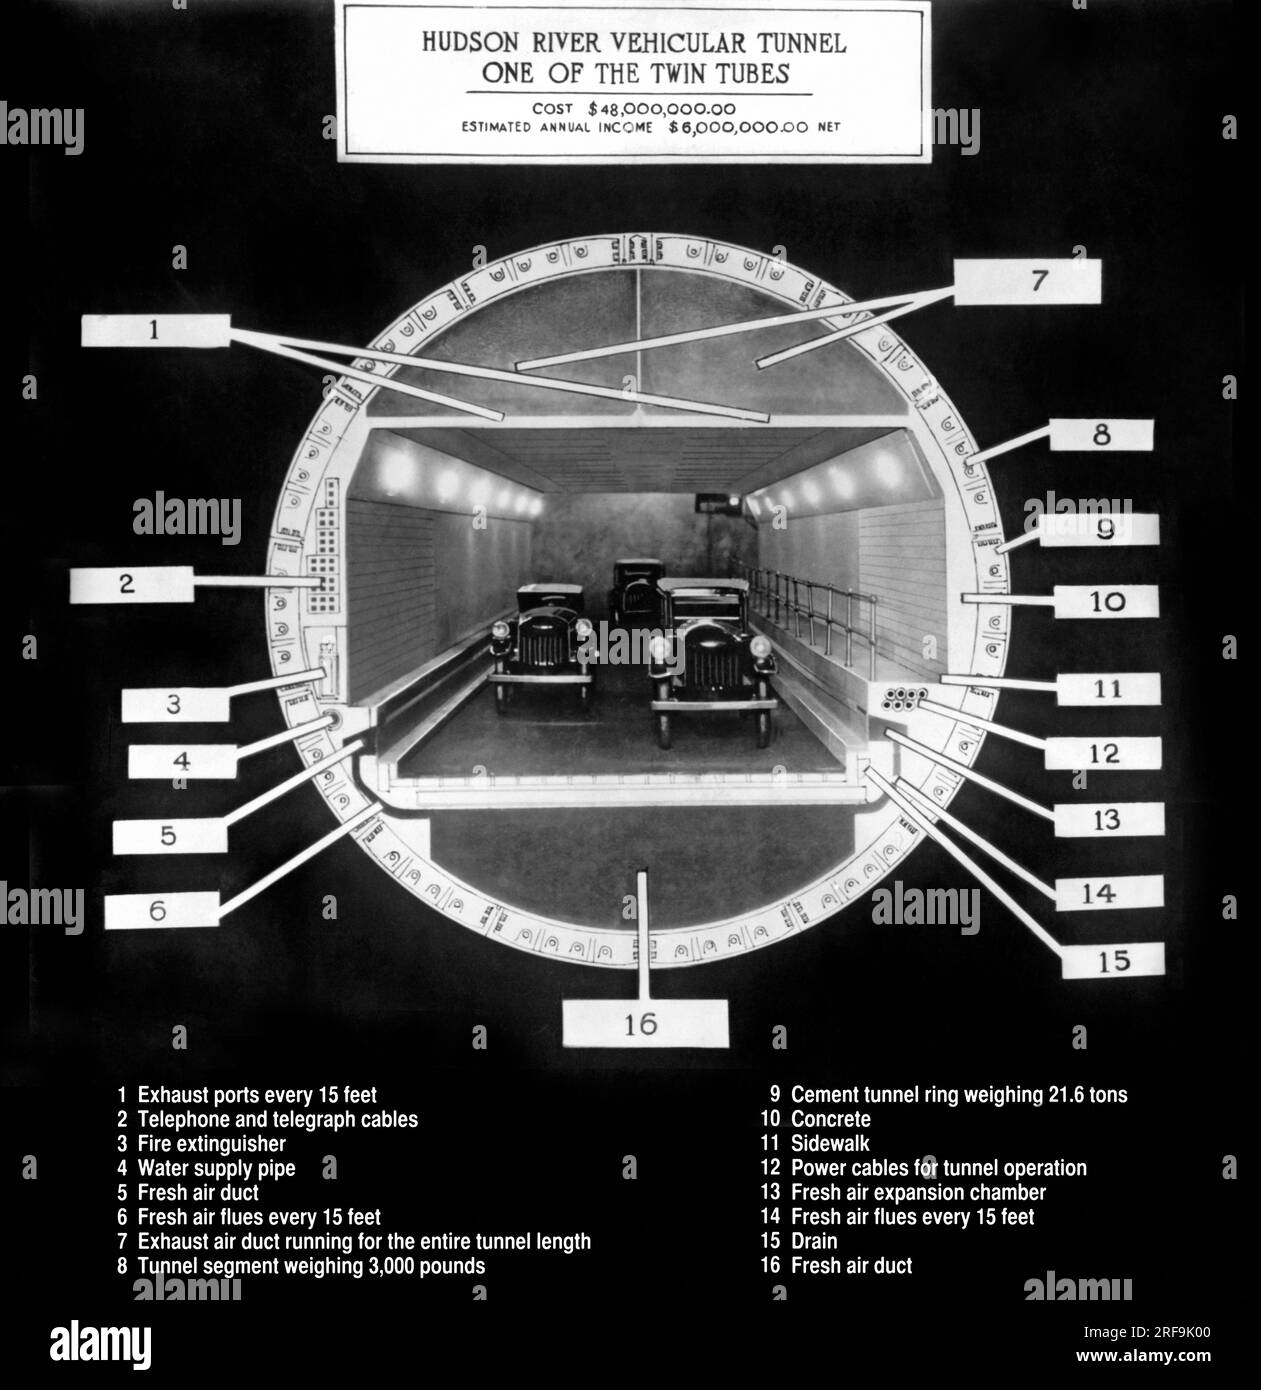 New York, New York:    c. 1922 A sectional view of the Holland Tunnel, a marvel of modern science, and all its features: 1. Exhaust airports. 2. Telephone & telegraph cables. 3. Fire extinguisher. 4. Water supply pipe. 5. Continuous duct for fresh air supply. 6. Fresh air flues every 15 feet. 7. Exhaust air ducts running the length of the tunnel. 8. Tunnel segment weighing 3000 pounds. 9. Weight of complete ring 21.6 tons. 10. Concrete. 11. Sidewalk. 12. Power cables for tunnel. 13. Fresh air expansion chamber. 14. Fresh air flues every 15 feet. 15. Drain. 16. Fresh air duct running entire len Stock Photo